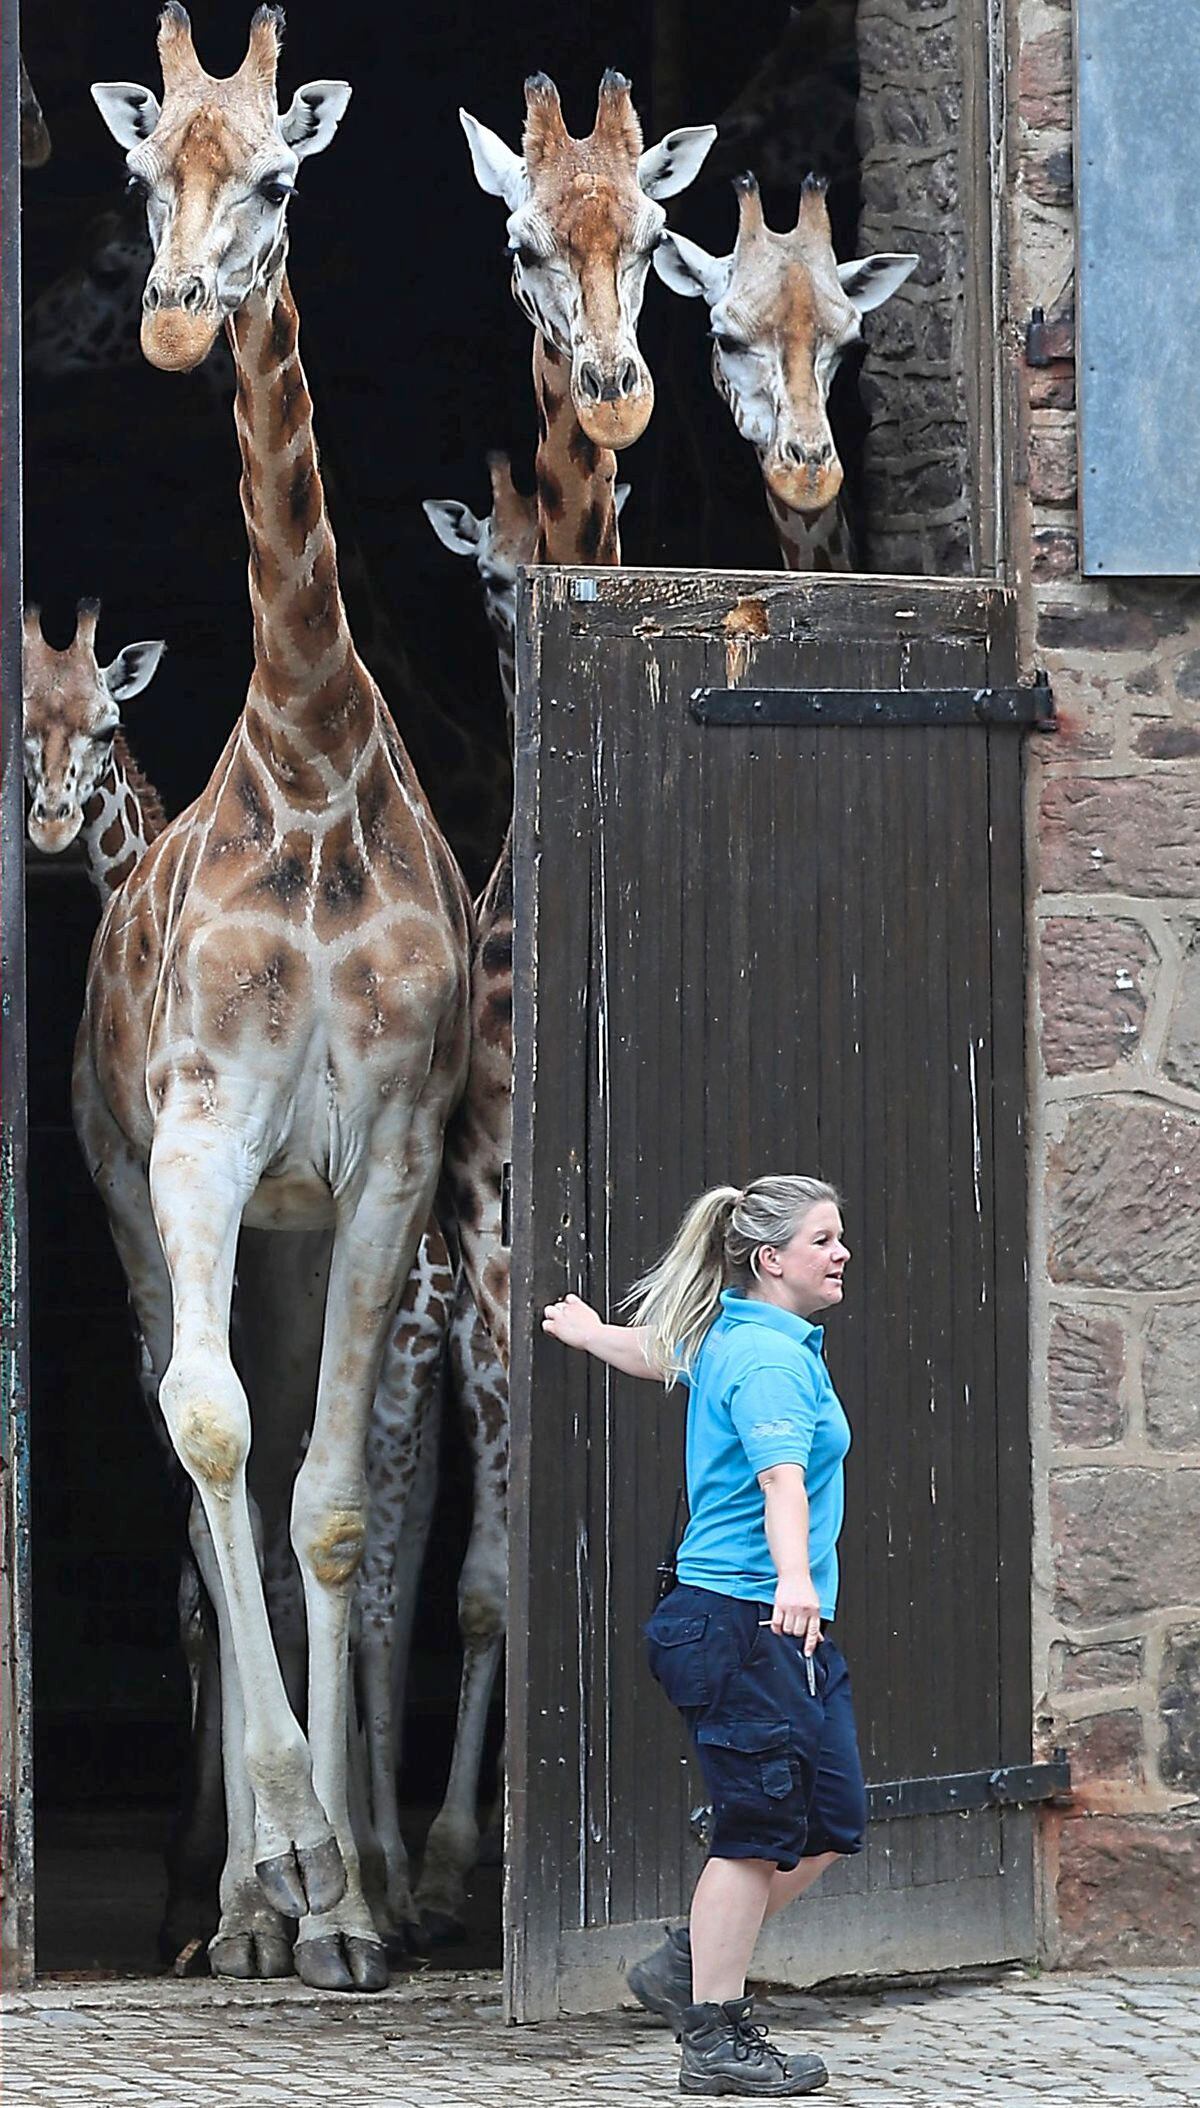 PABEST.Hannah Owens, giraffe keeper, opens the doors to release the giraffes at Chester Zoo as it reopens to visitors following the further easing of coronavirus lockdown measures in England. PA Photo. Picture date: Monday June 15, 2020. See PA story HEALTH CoronavirusReopenings. Photo credit should read: Peter Byrne/PA Wire..